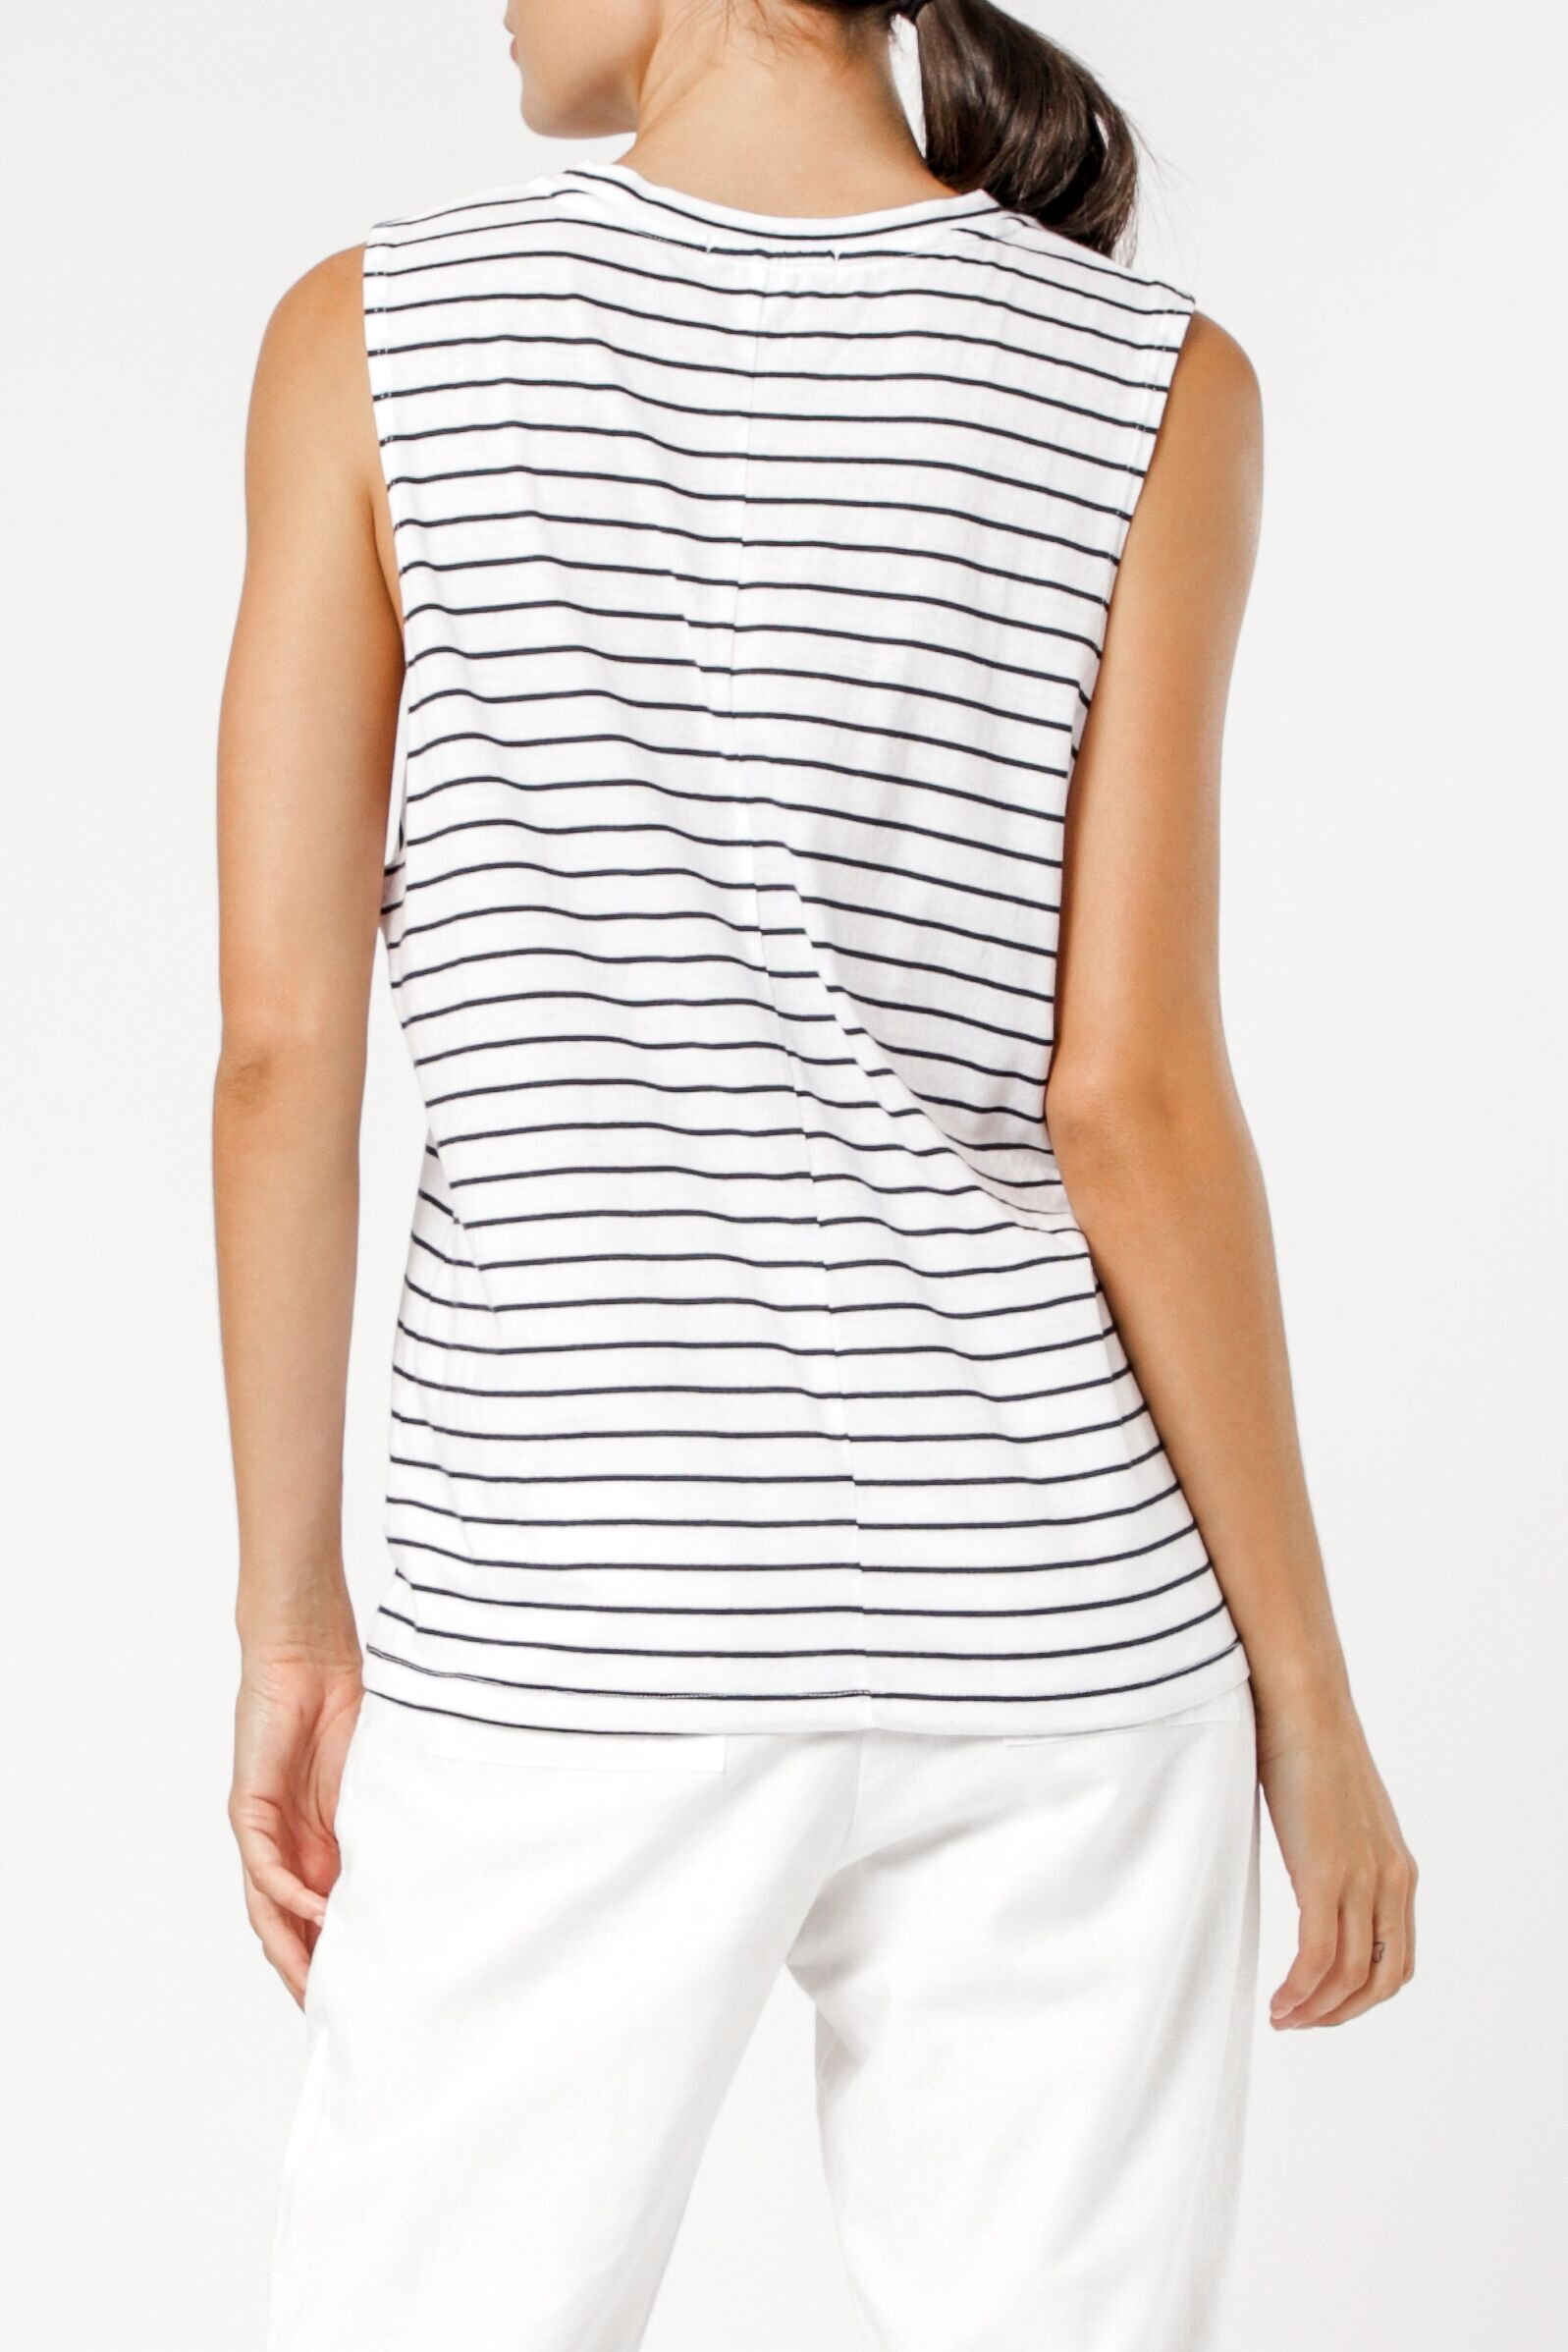 Nude Lucy keira basic muscle navy stripe top, t shirt